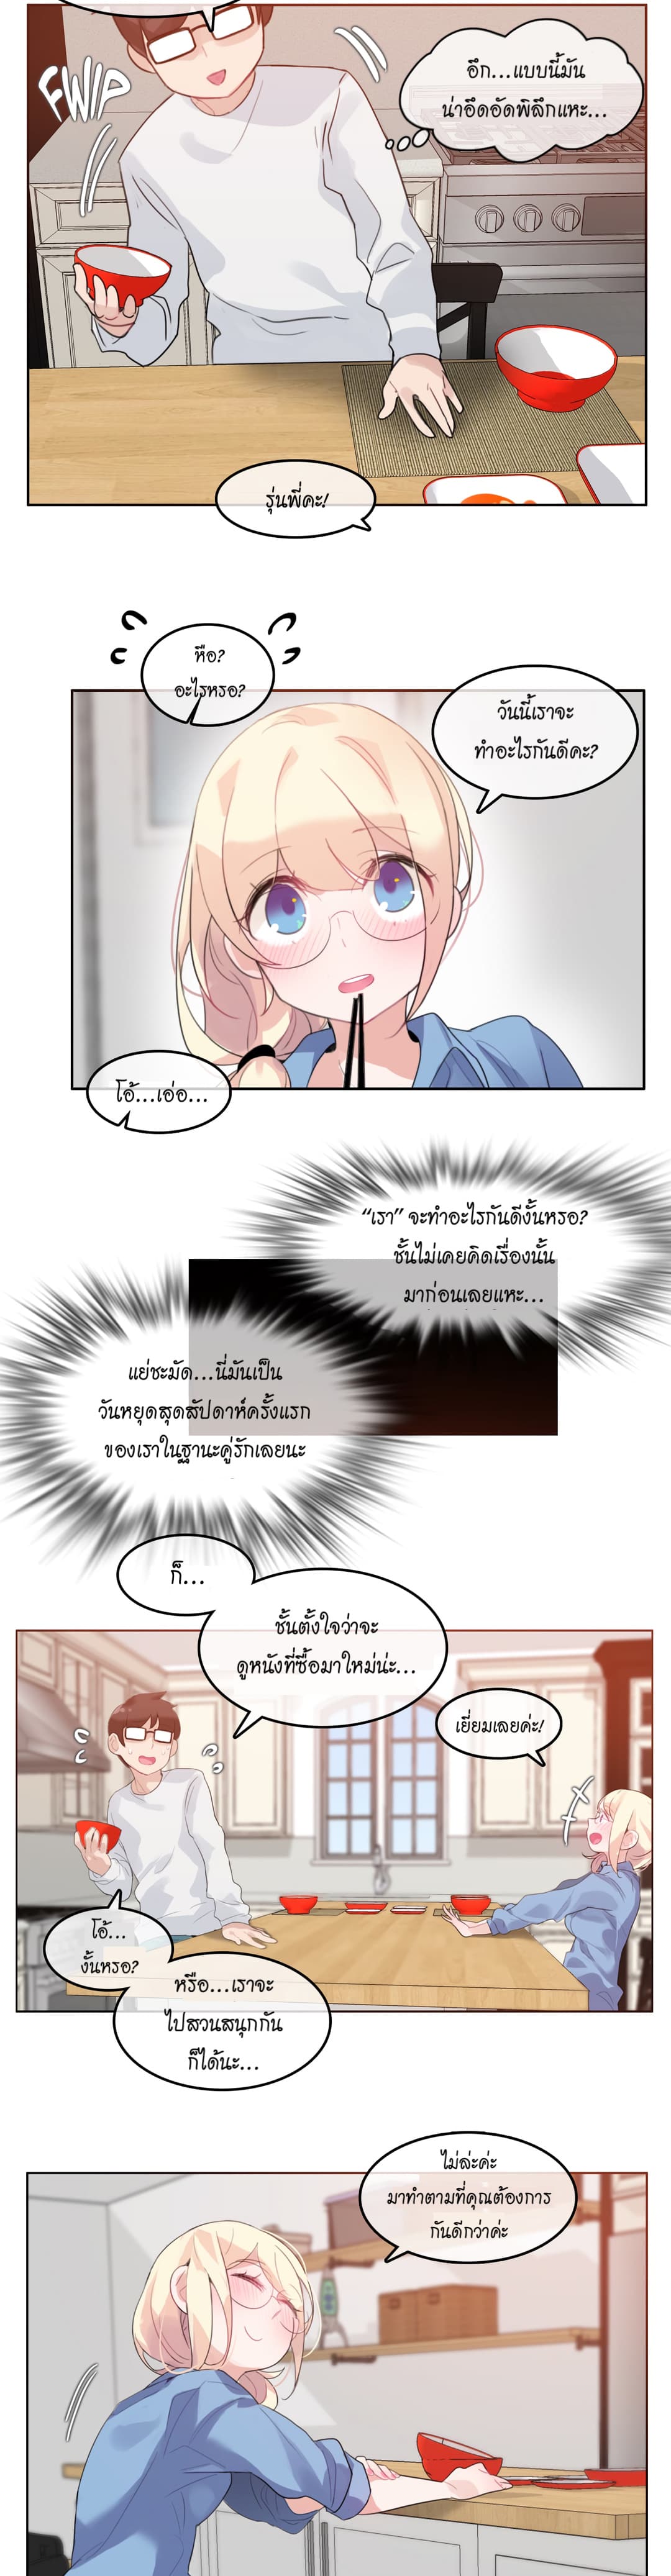 A Pervert’s Daily Life 28 (18)